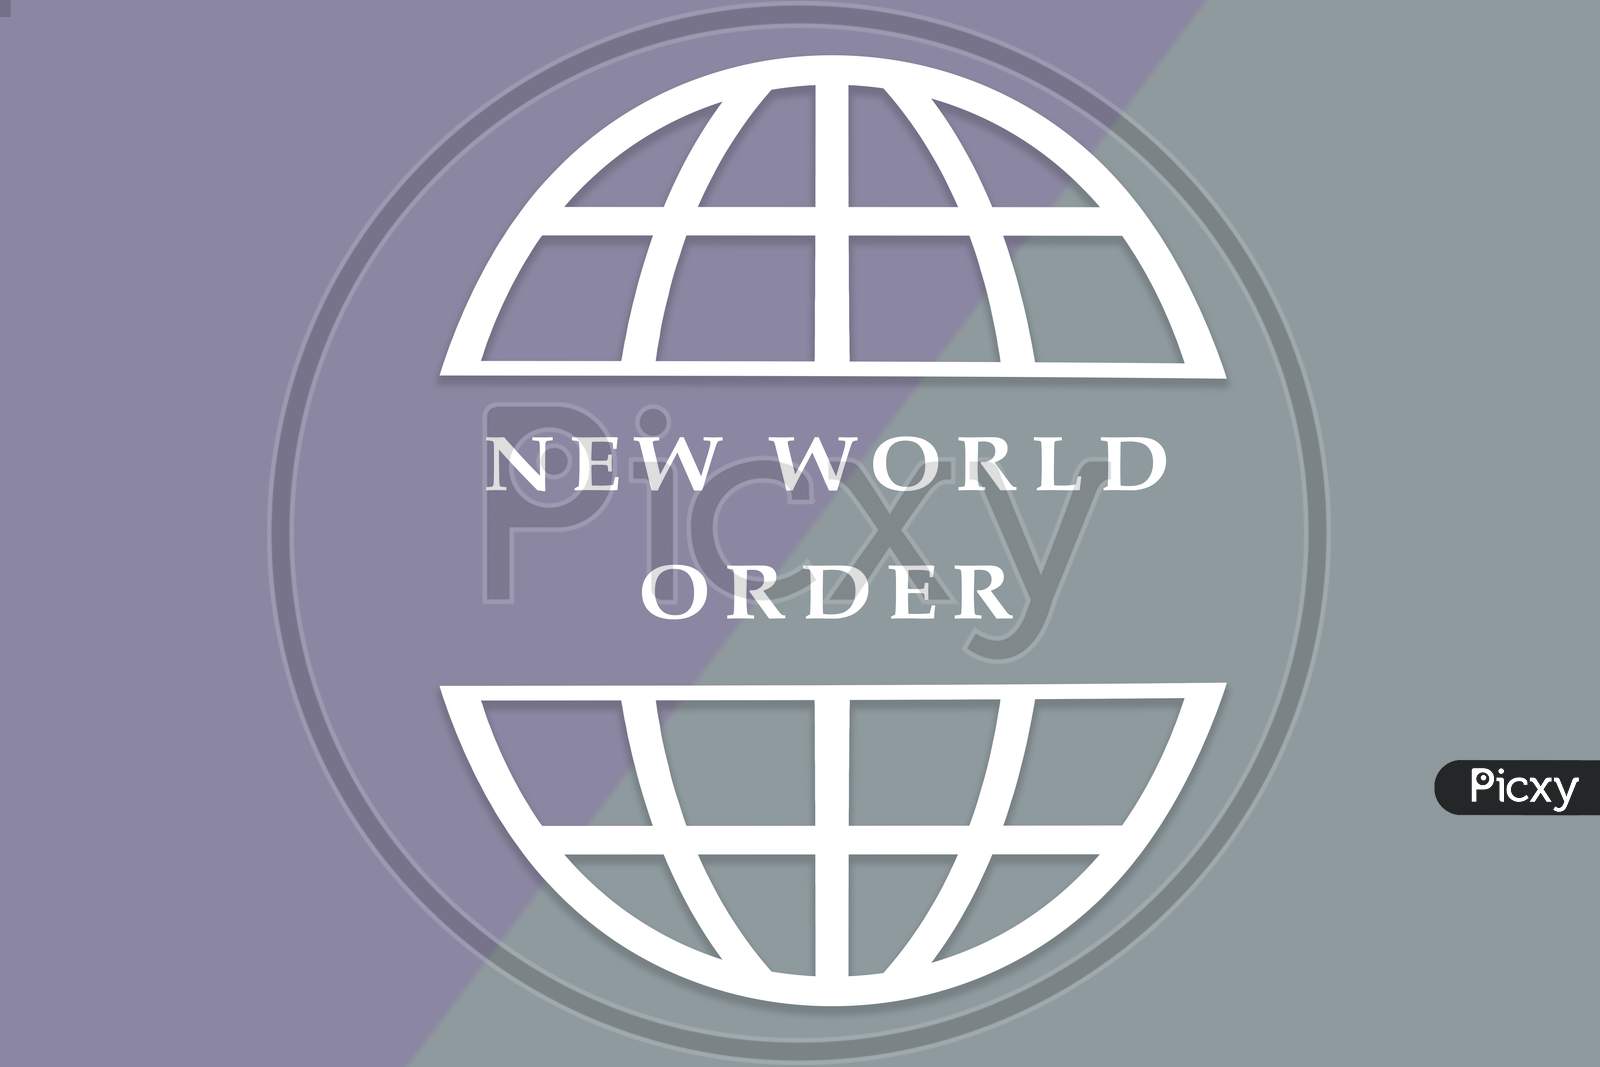 Concept Of New World Order In Geopolitics After Covid-19 Or Coronavirus Outbreak.